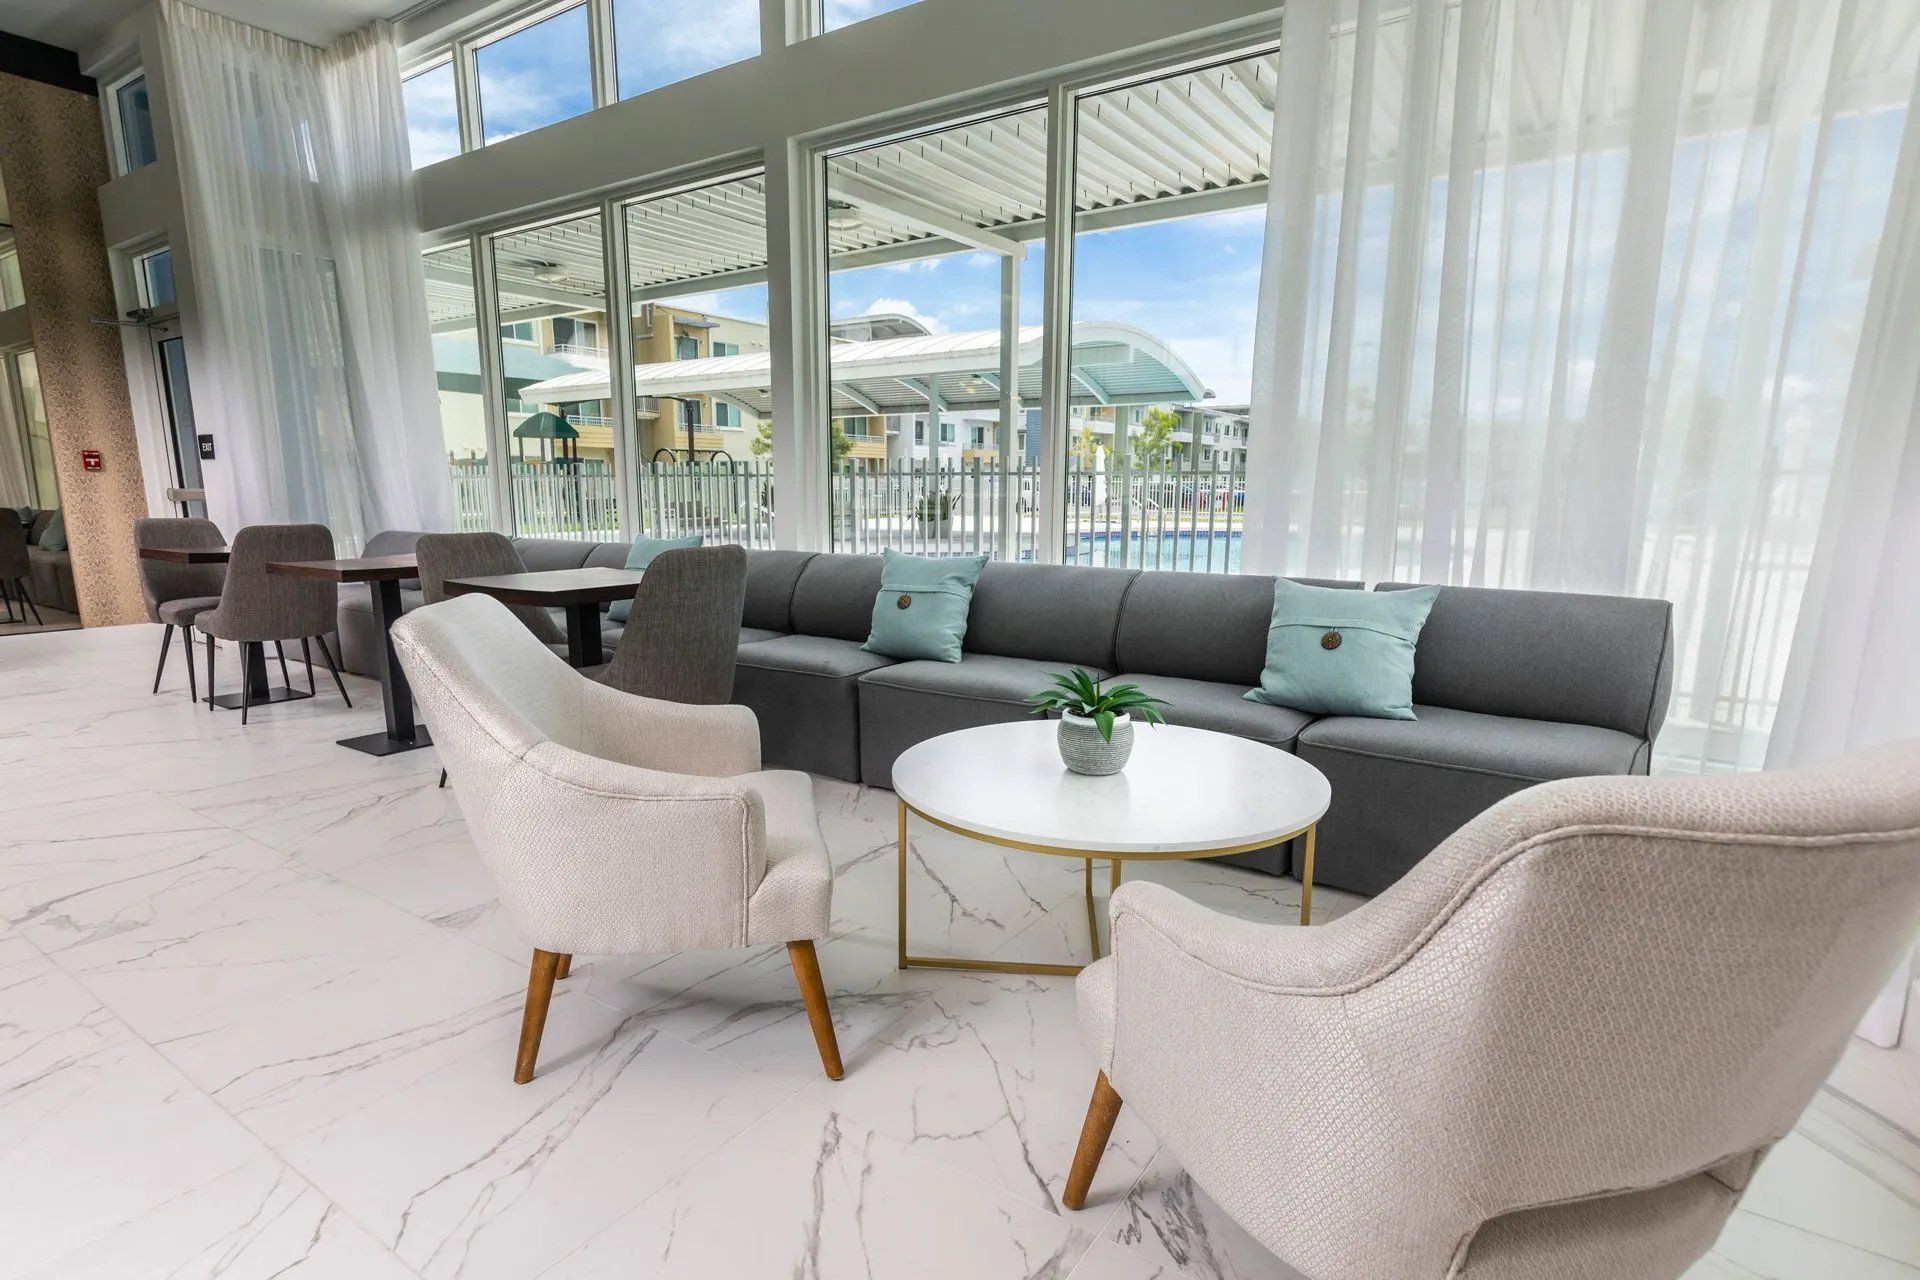 Resident seating area at Sophia Square Apartments in Homestead, FL.